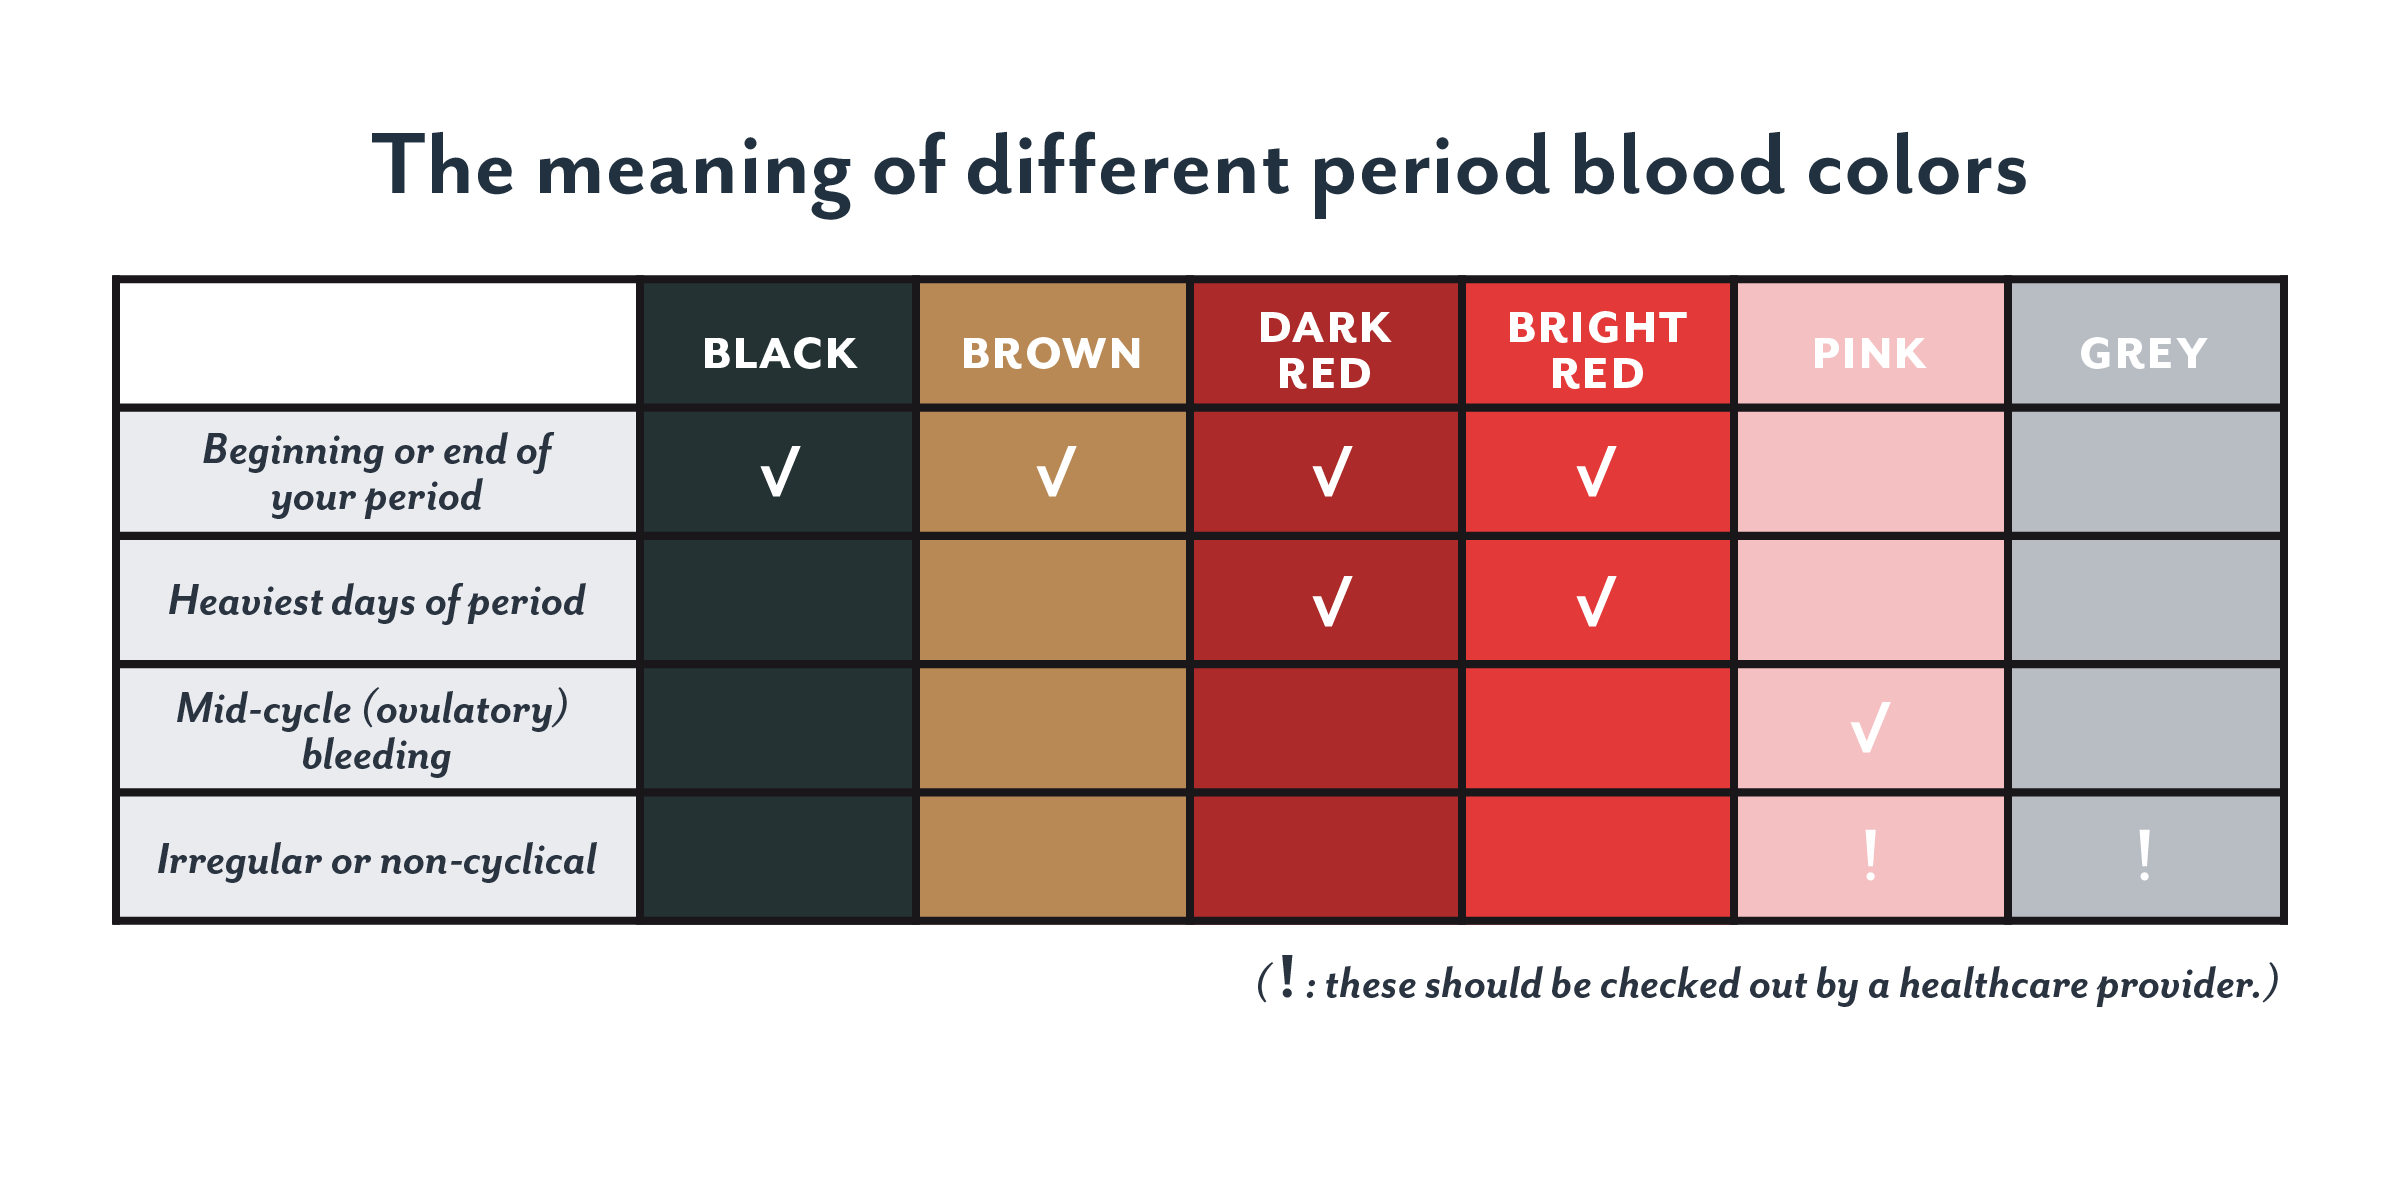 Period blood color: brown, black, or dark  does it matter?